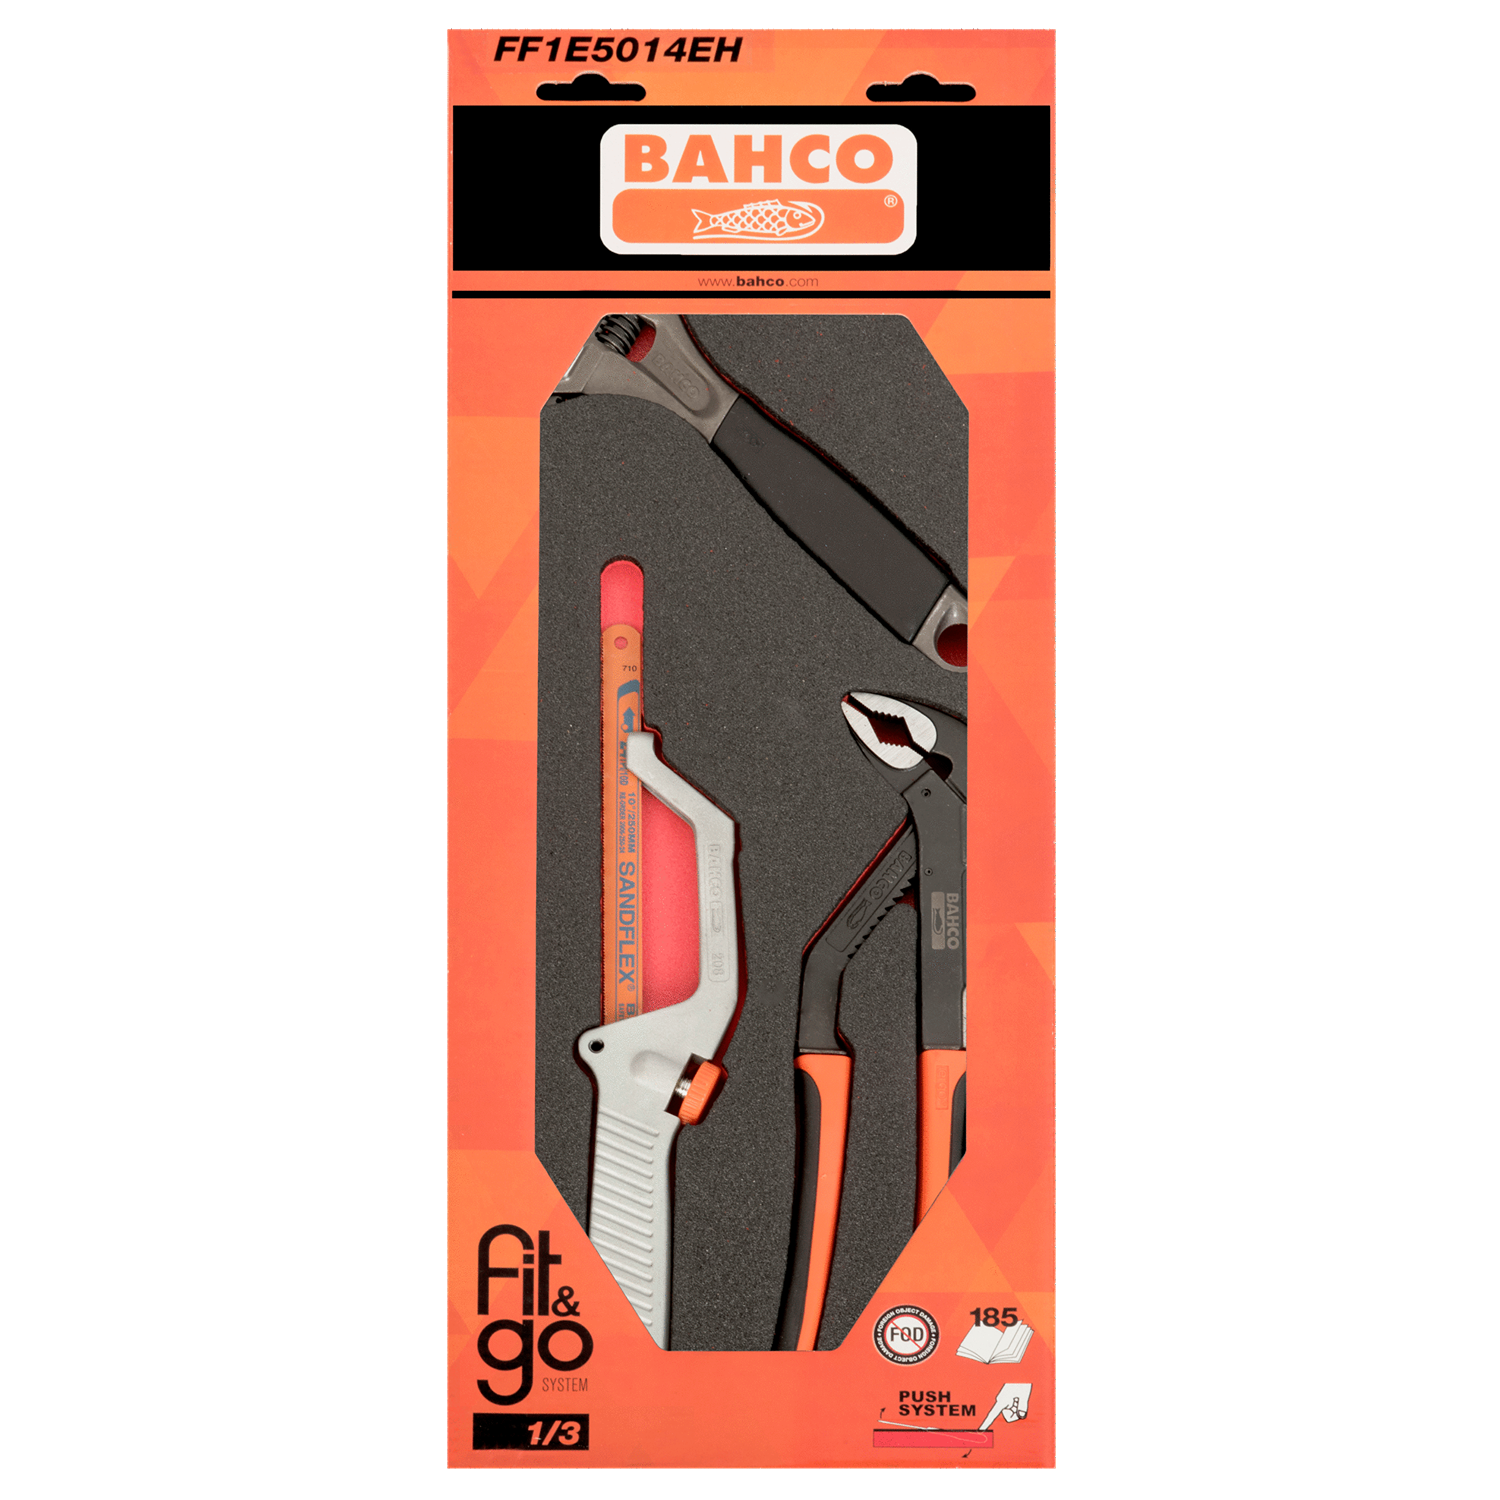 BAHCO FF1E5014EH Fit&Go 1/3 Foam Inlay Spanner& Metal Cutting Set - Premium Metal Cutting Set from BAHCO - Shop now at Yew Aik.